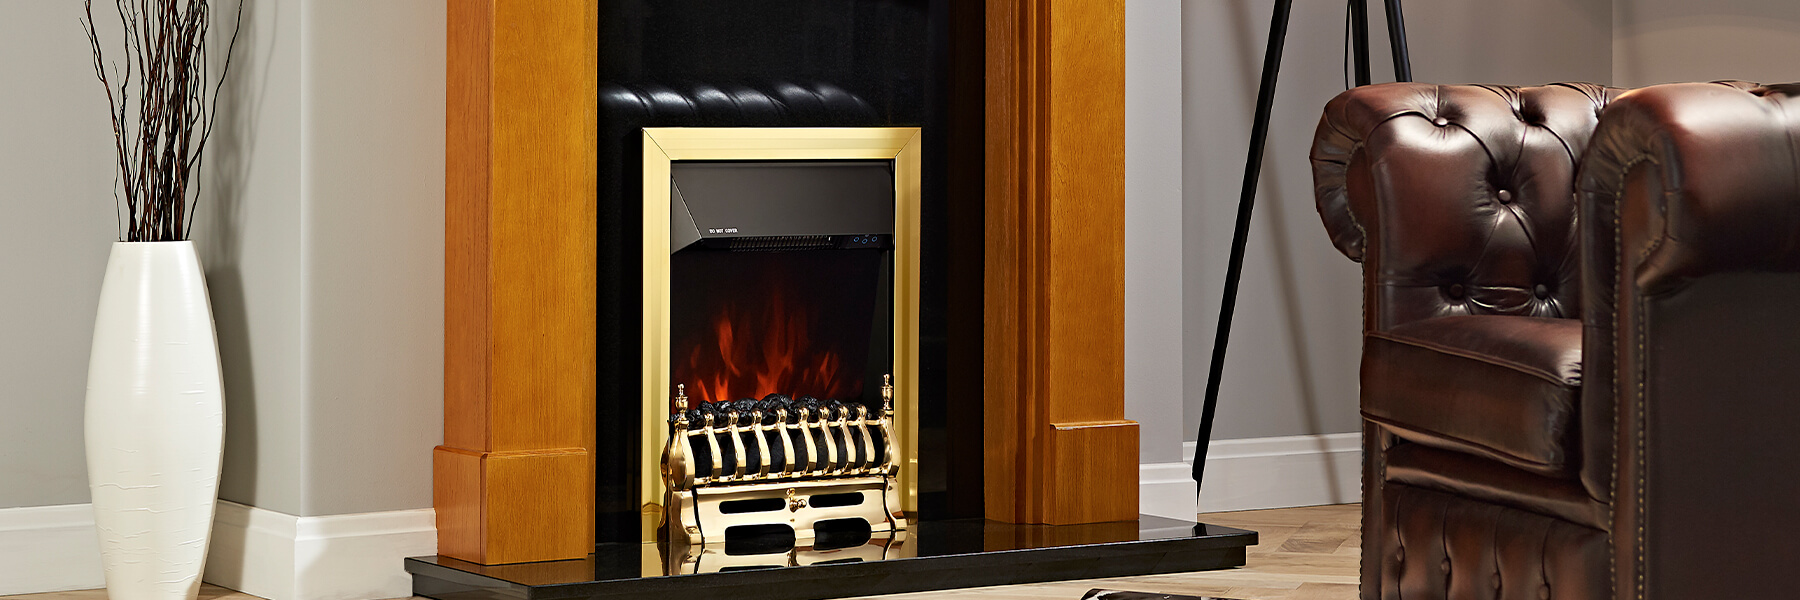 LED Inset Electric Fires